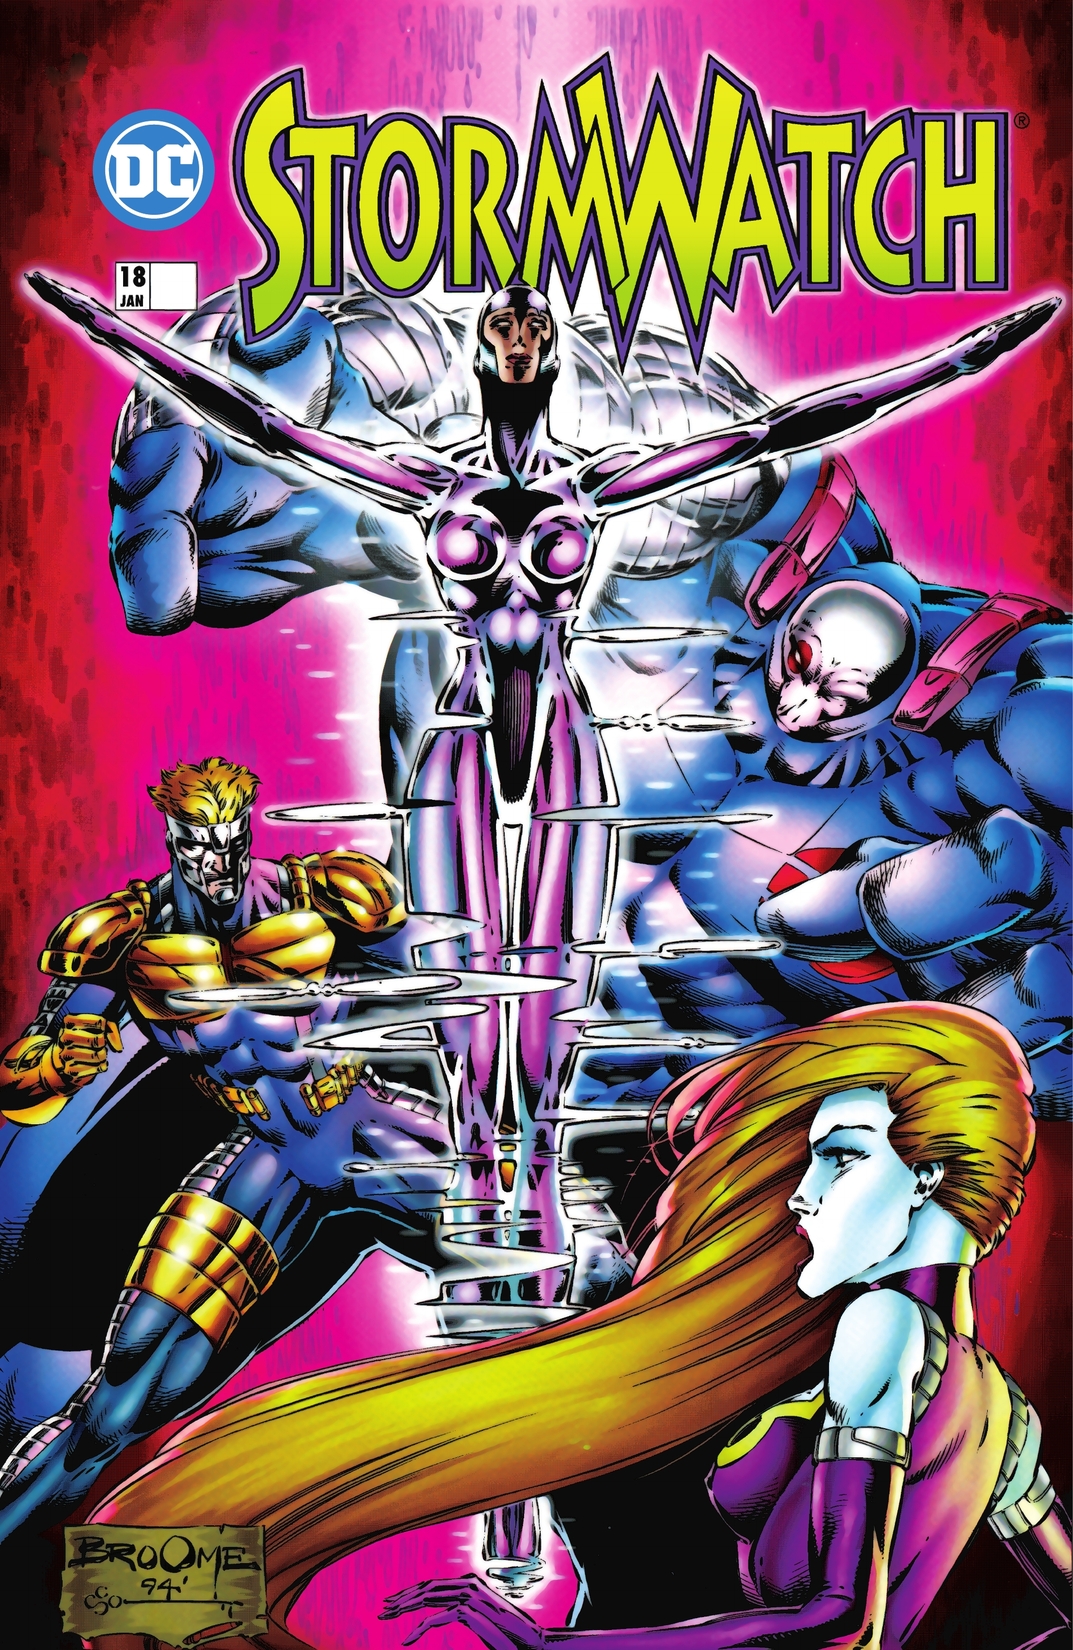 Stormwatch (1993-1997) #18 preview images